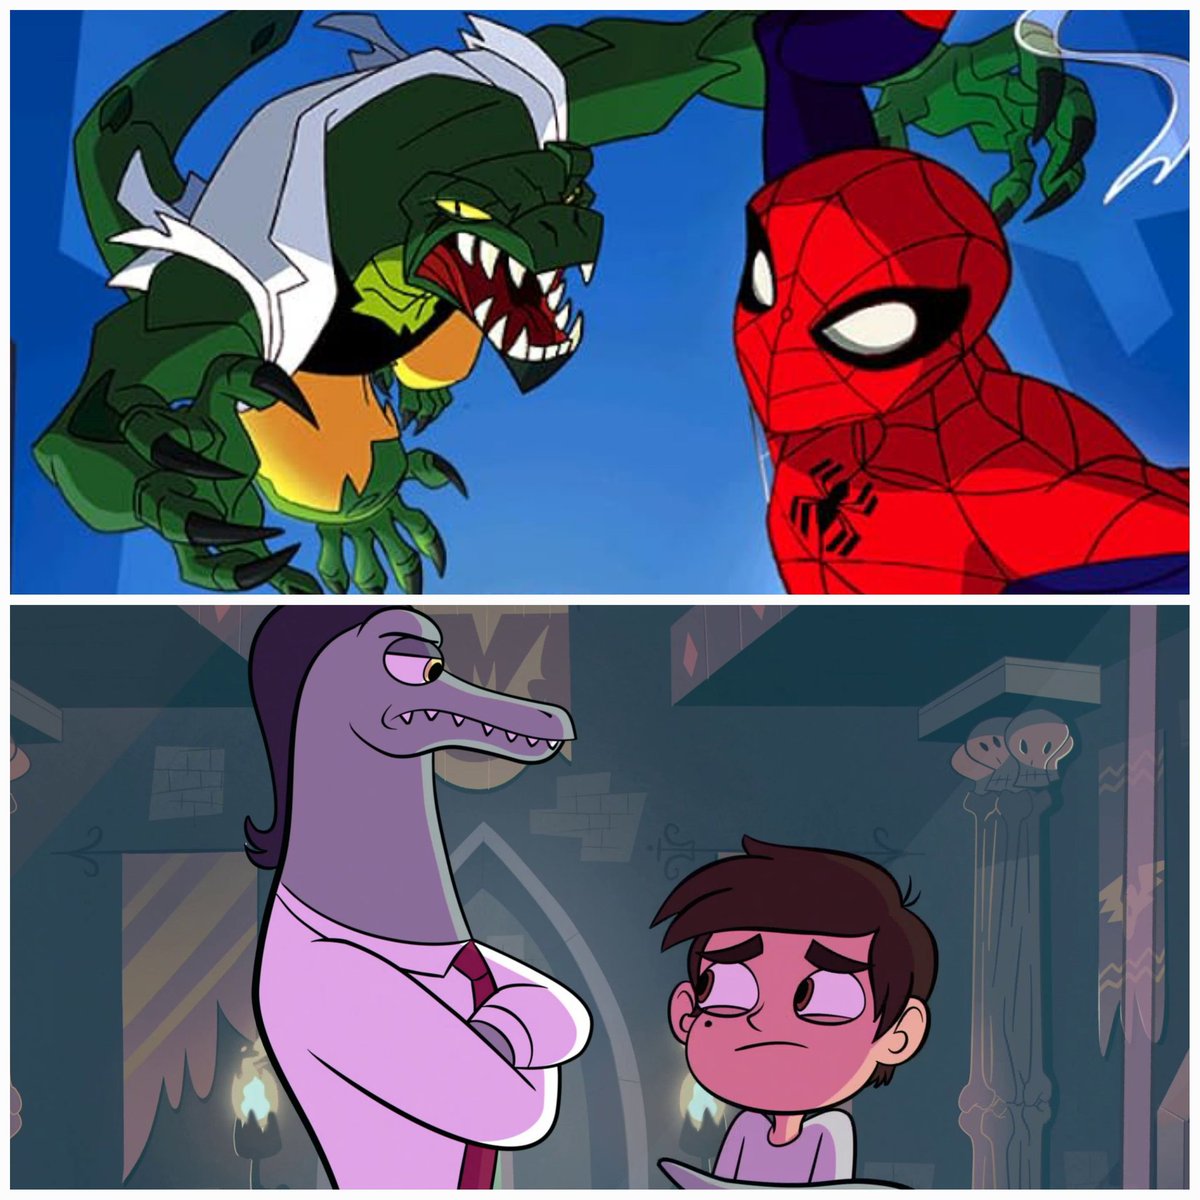 Did @DaronNefcy get some inspiration from #SpectacularSpiderman ?